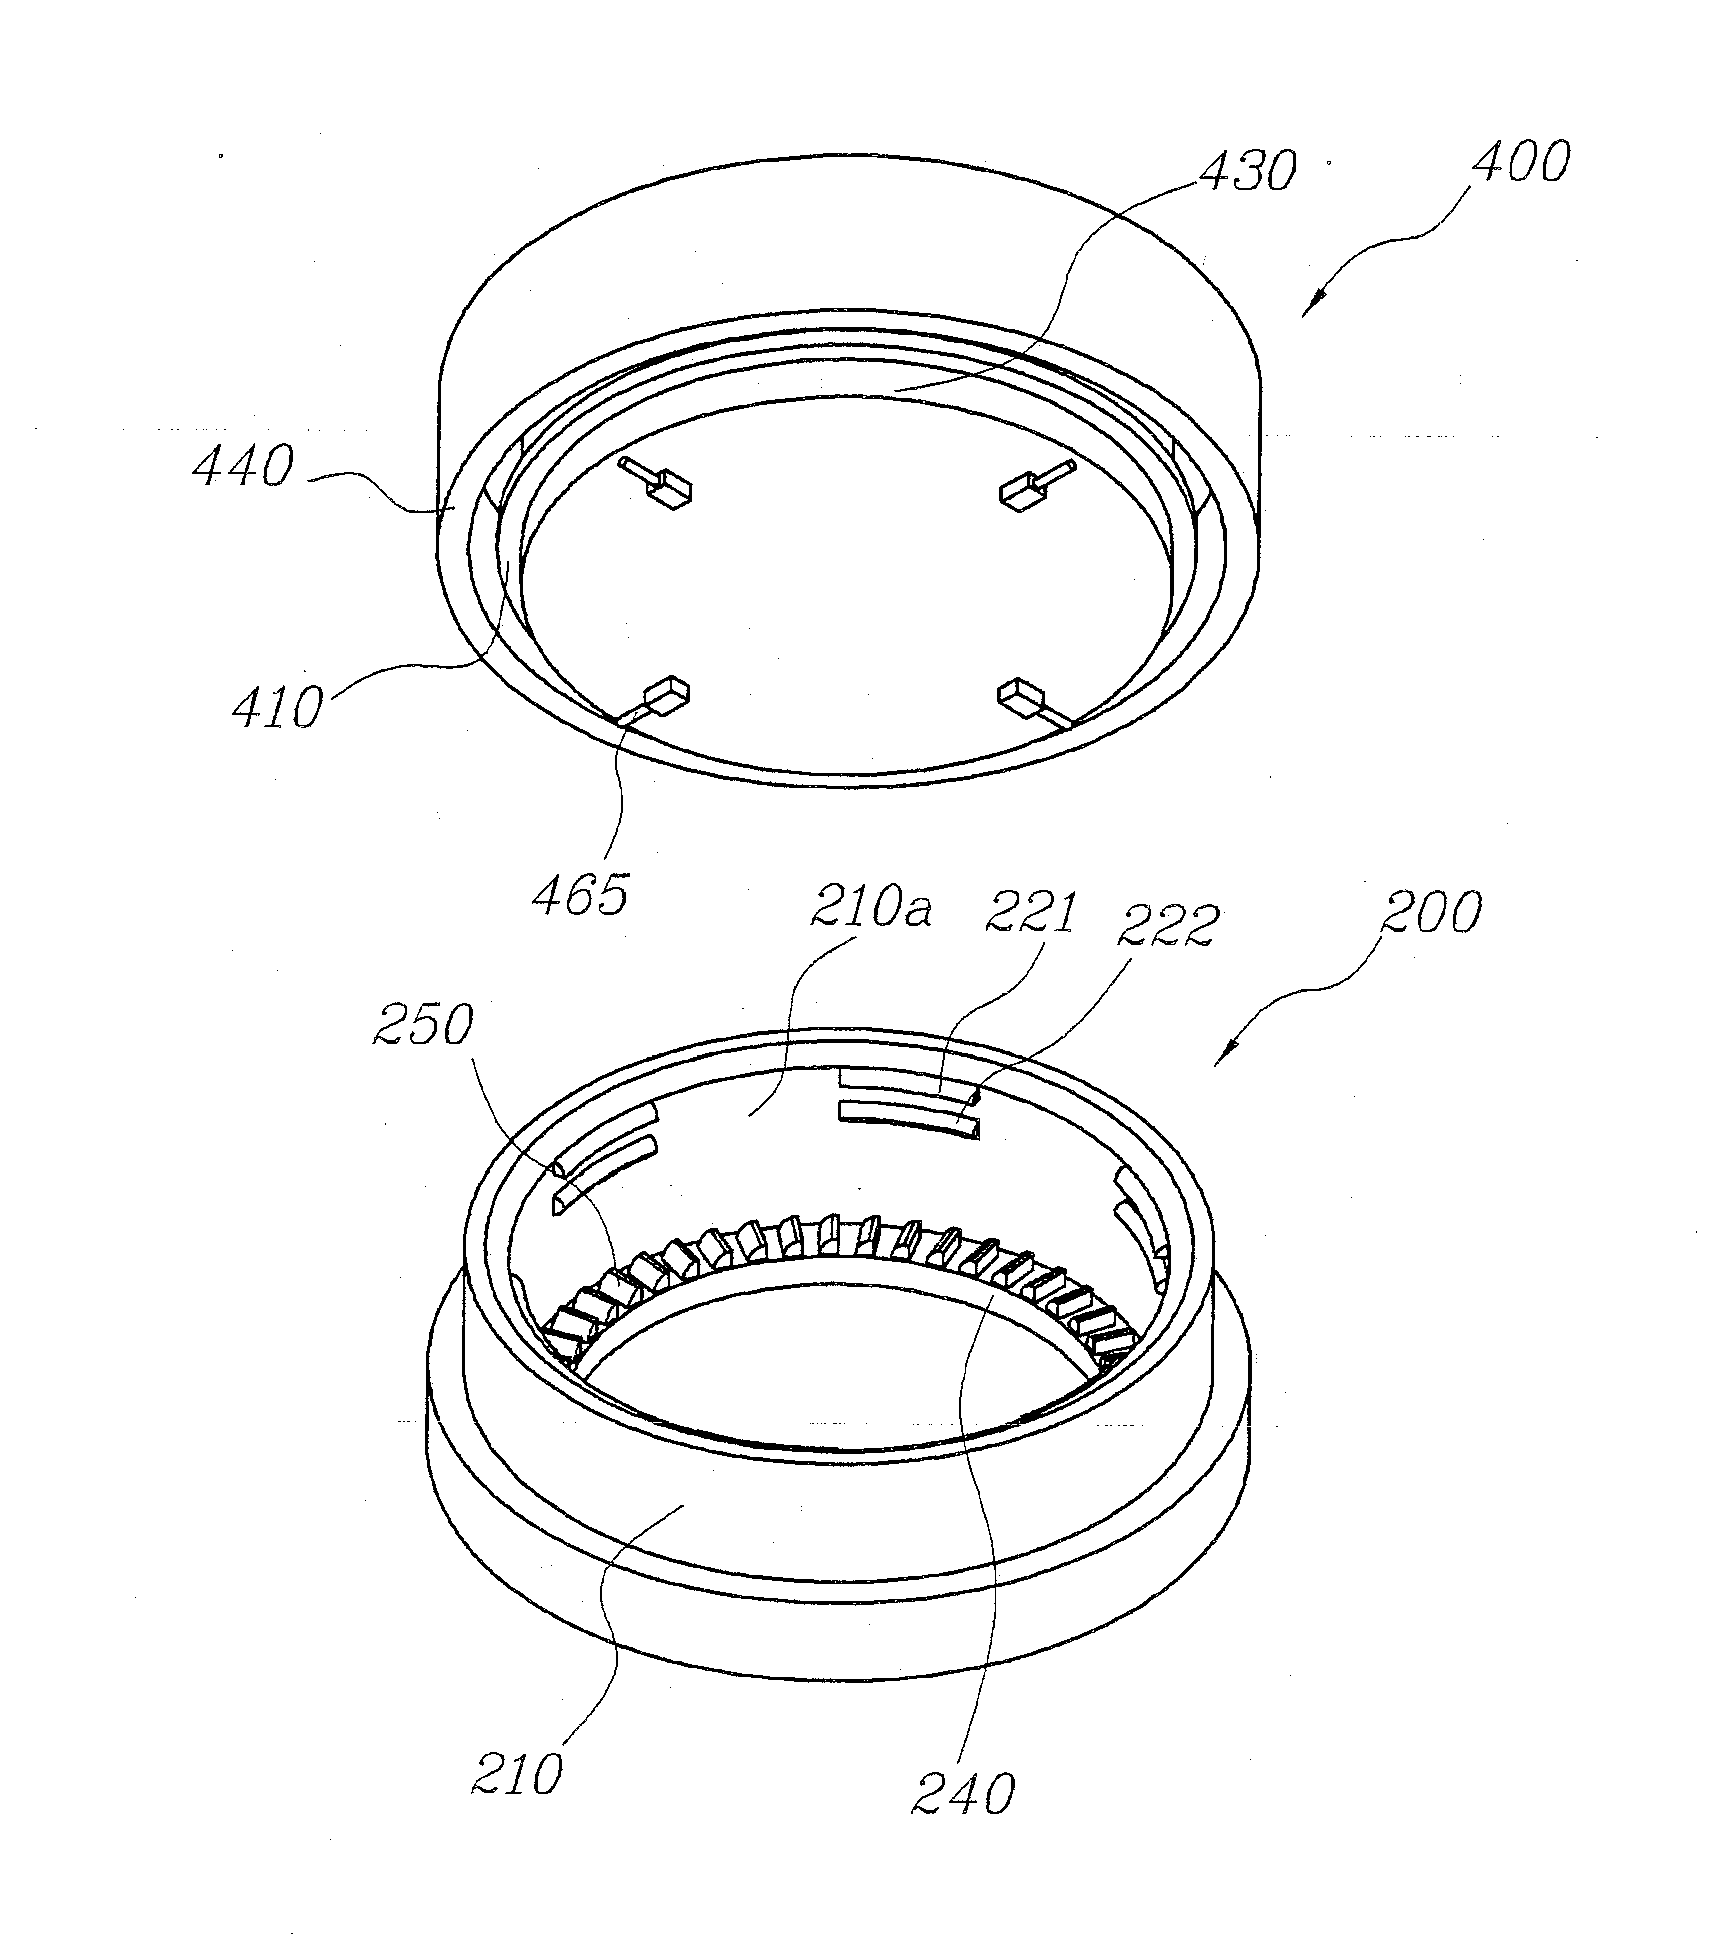 String winding and unwinding apparatus